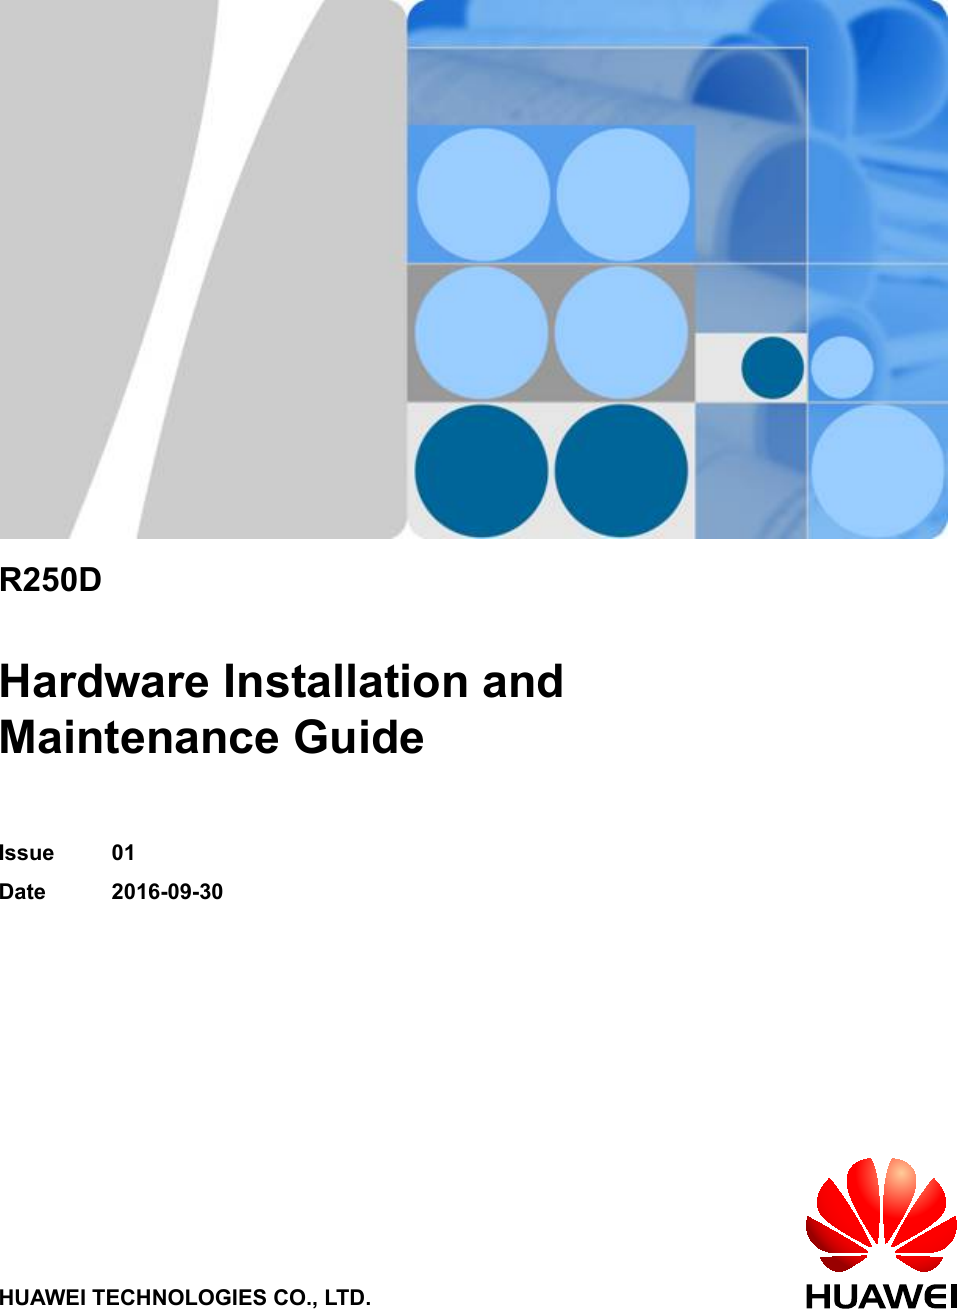 R250DHardware Installation andMaintenance GuideIssue 01Date 2016-09-30HUAWEI TECHNOLOGIES CO., LTD.